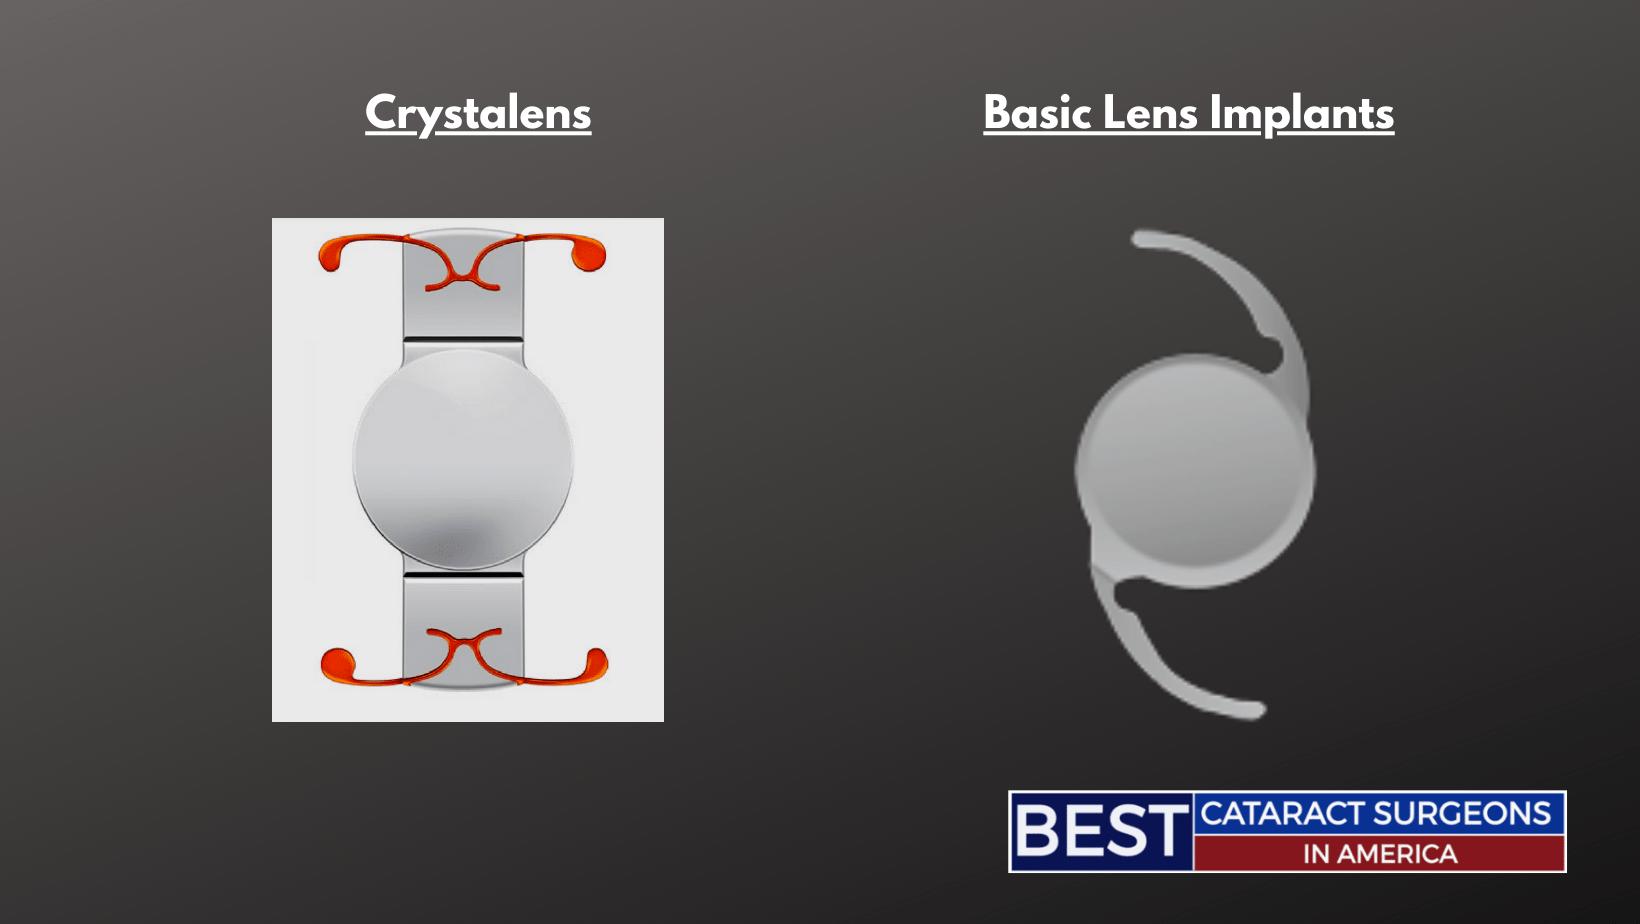 Crystalens versus Basic Lens for Cataract Surgery